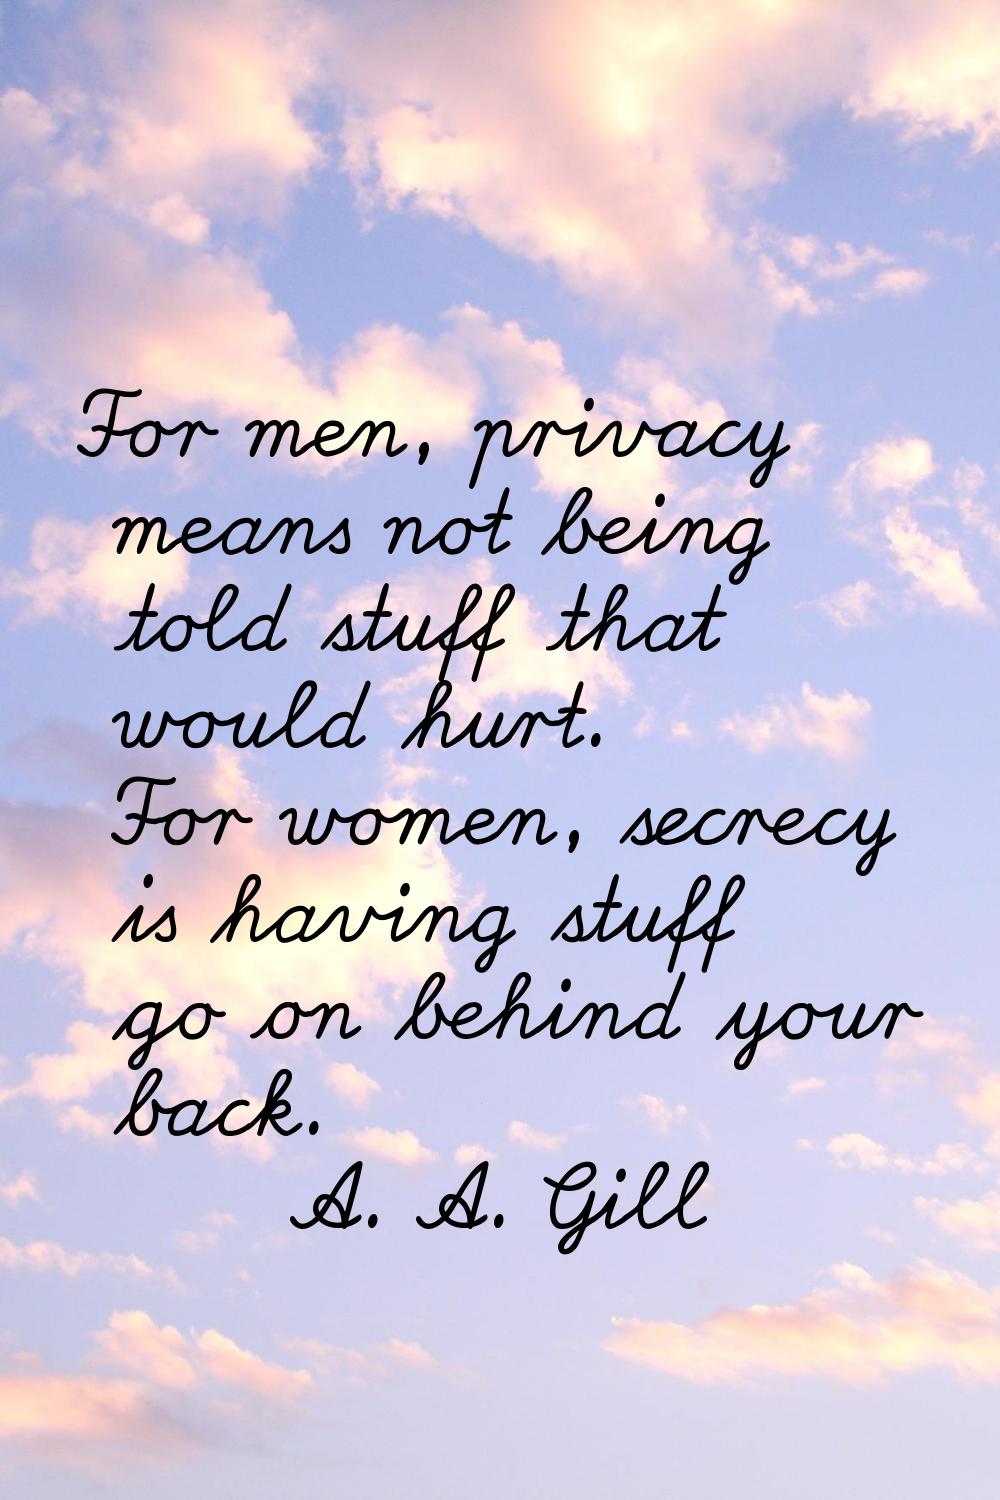 For men, privacy means not being told stuff that would hurt. For women, secrecy is having stuff go 